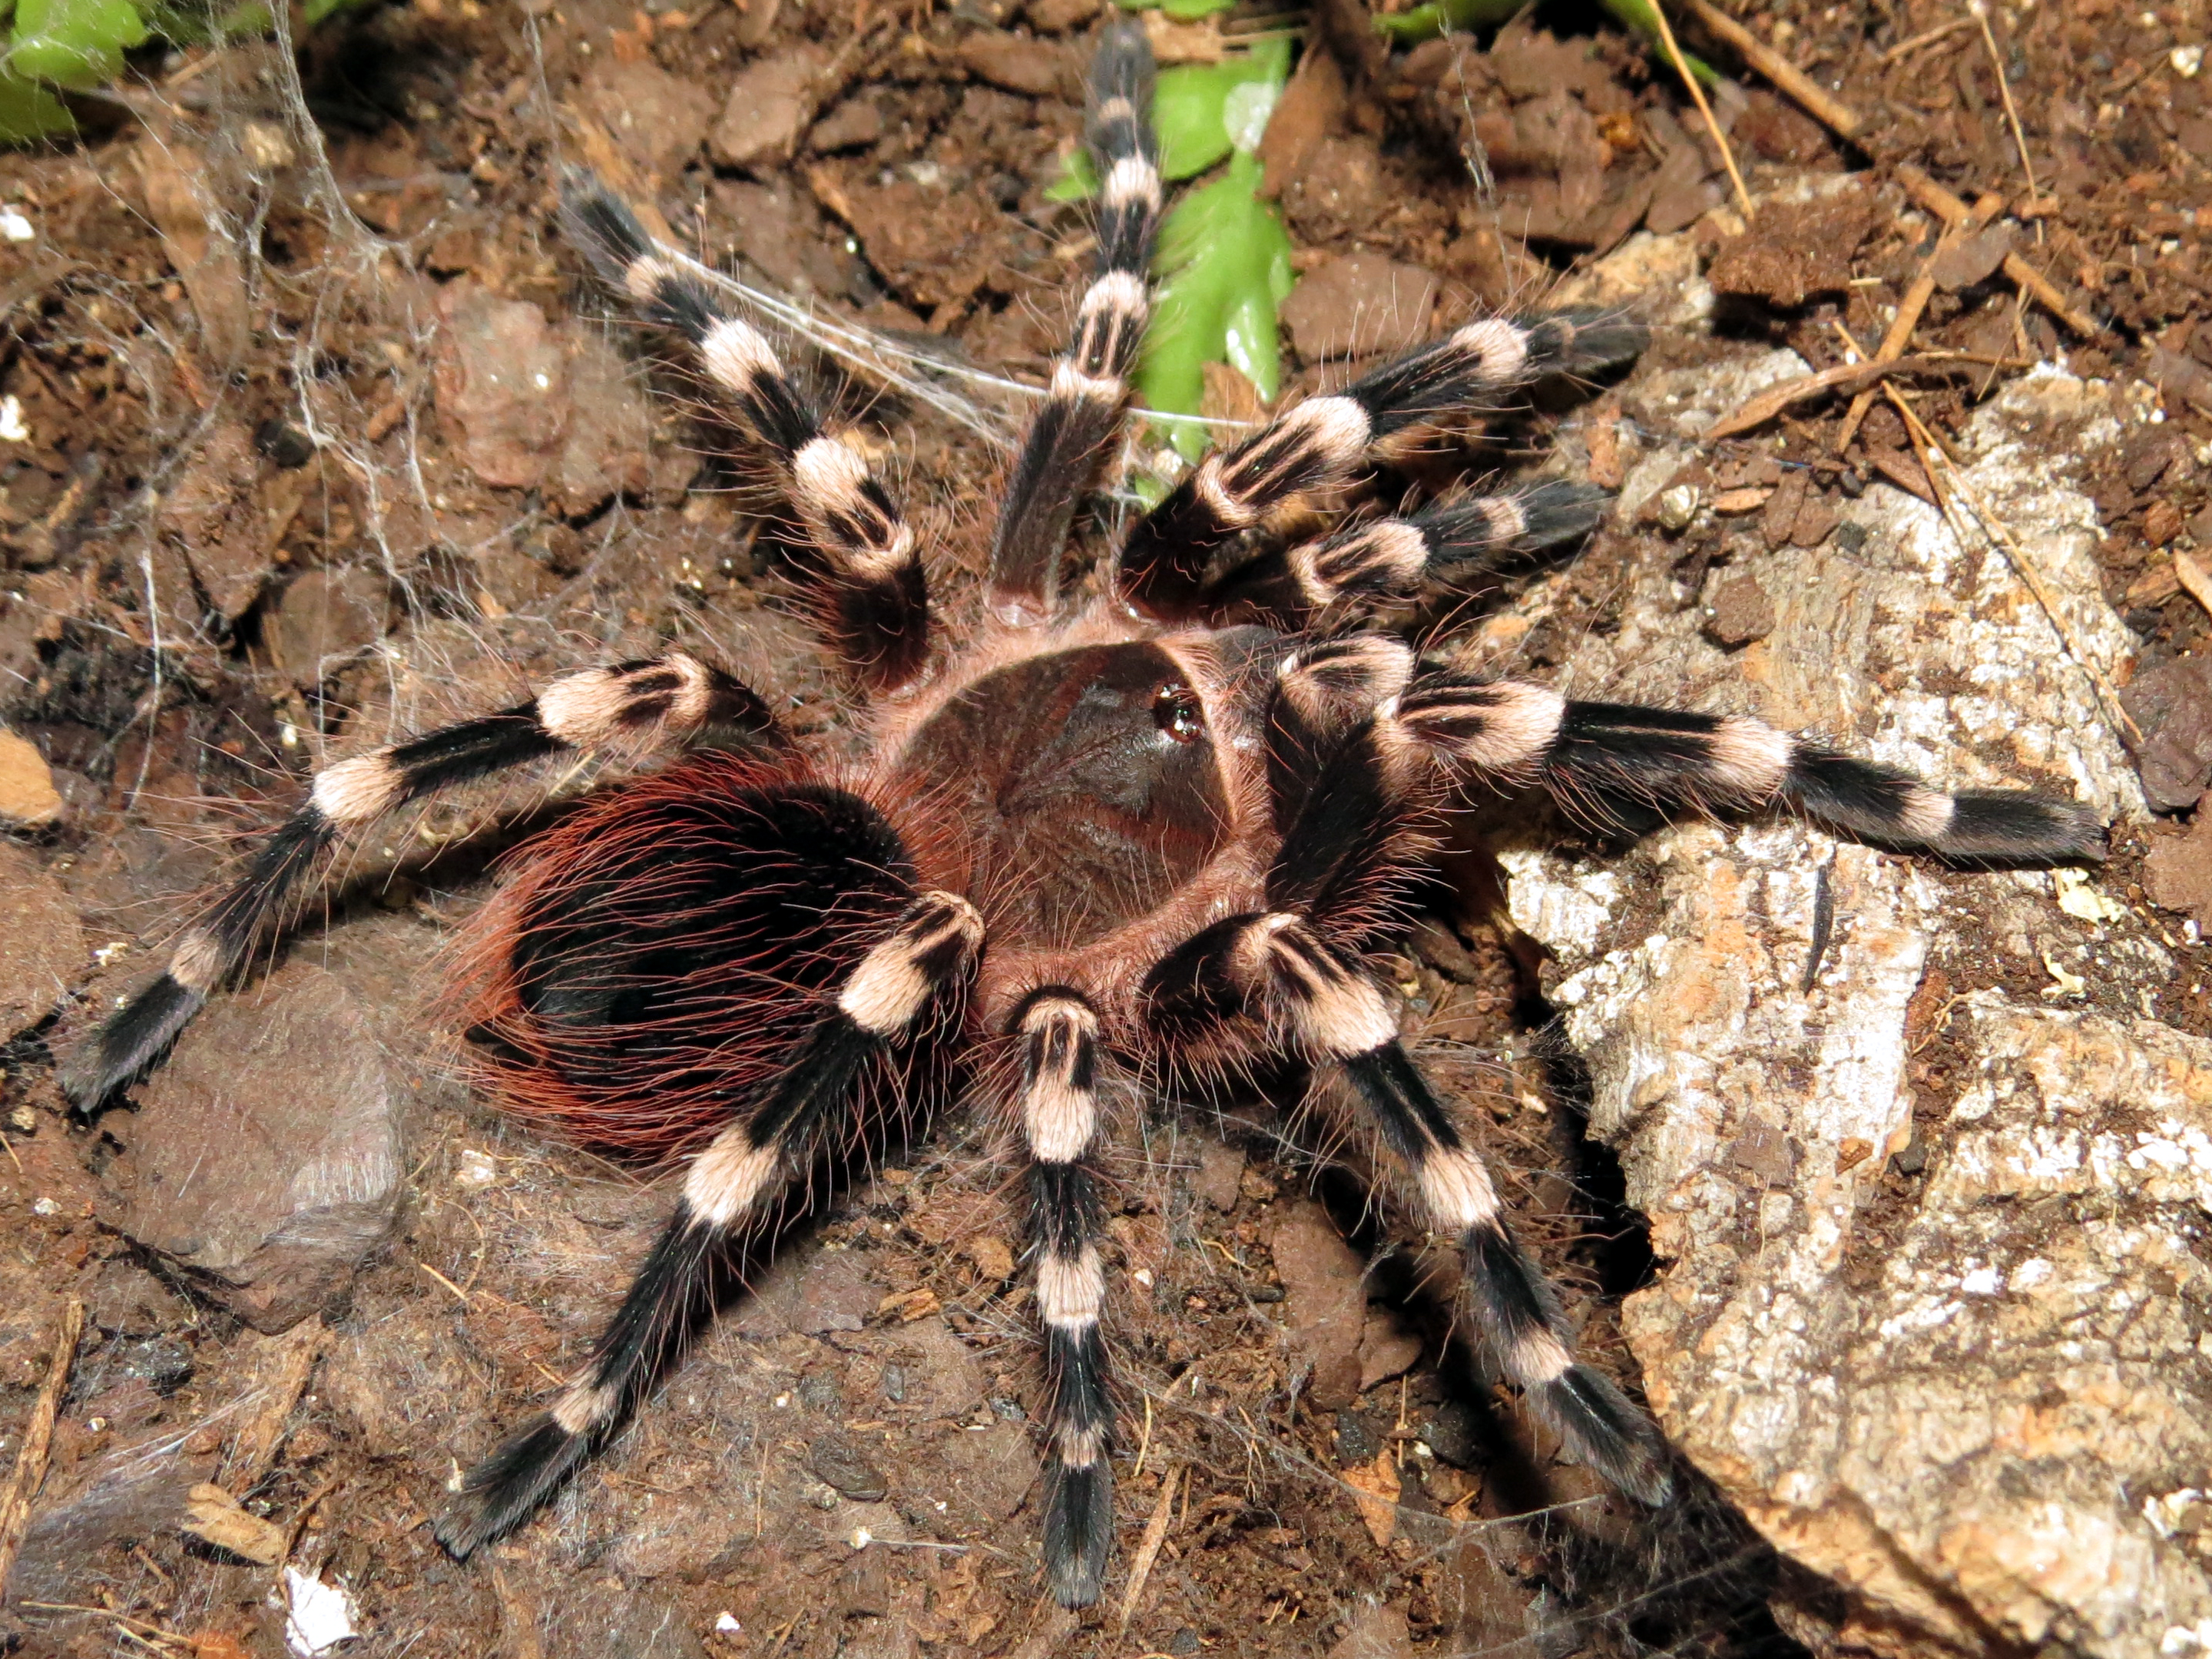 His New Suit (♂ Acanthoscurria geniculata 3.5")